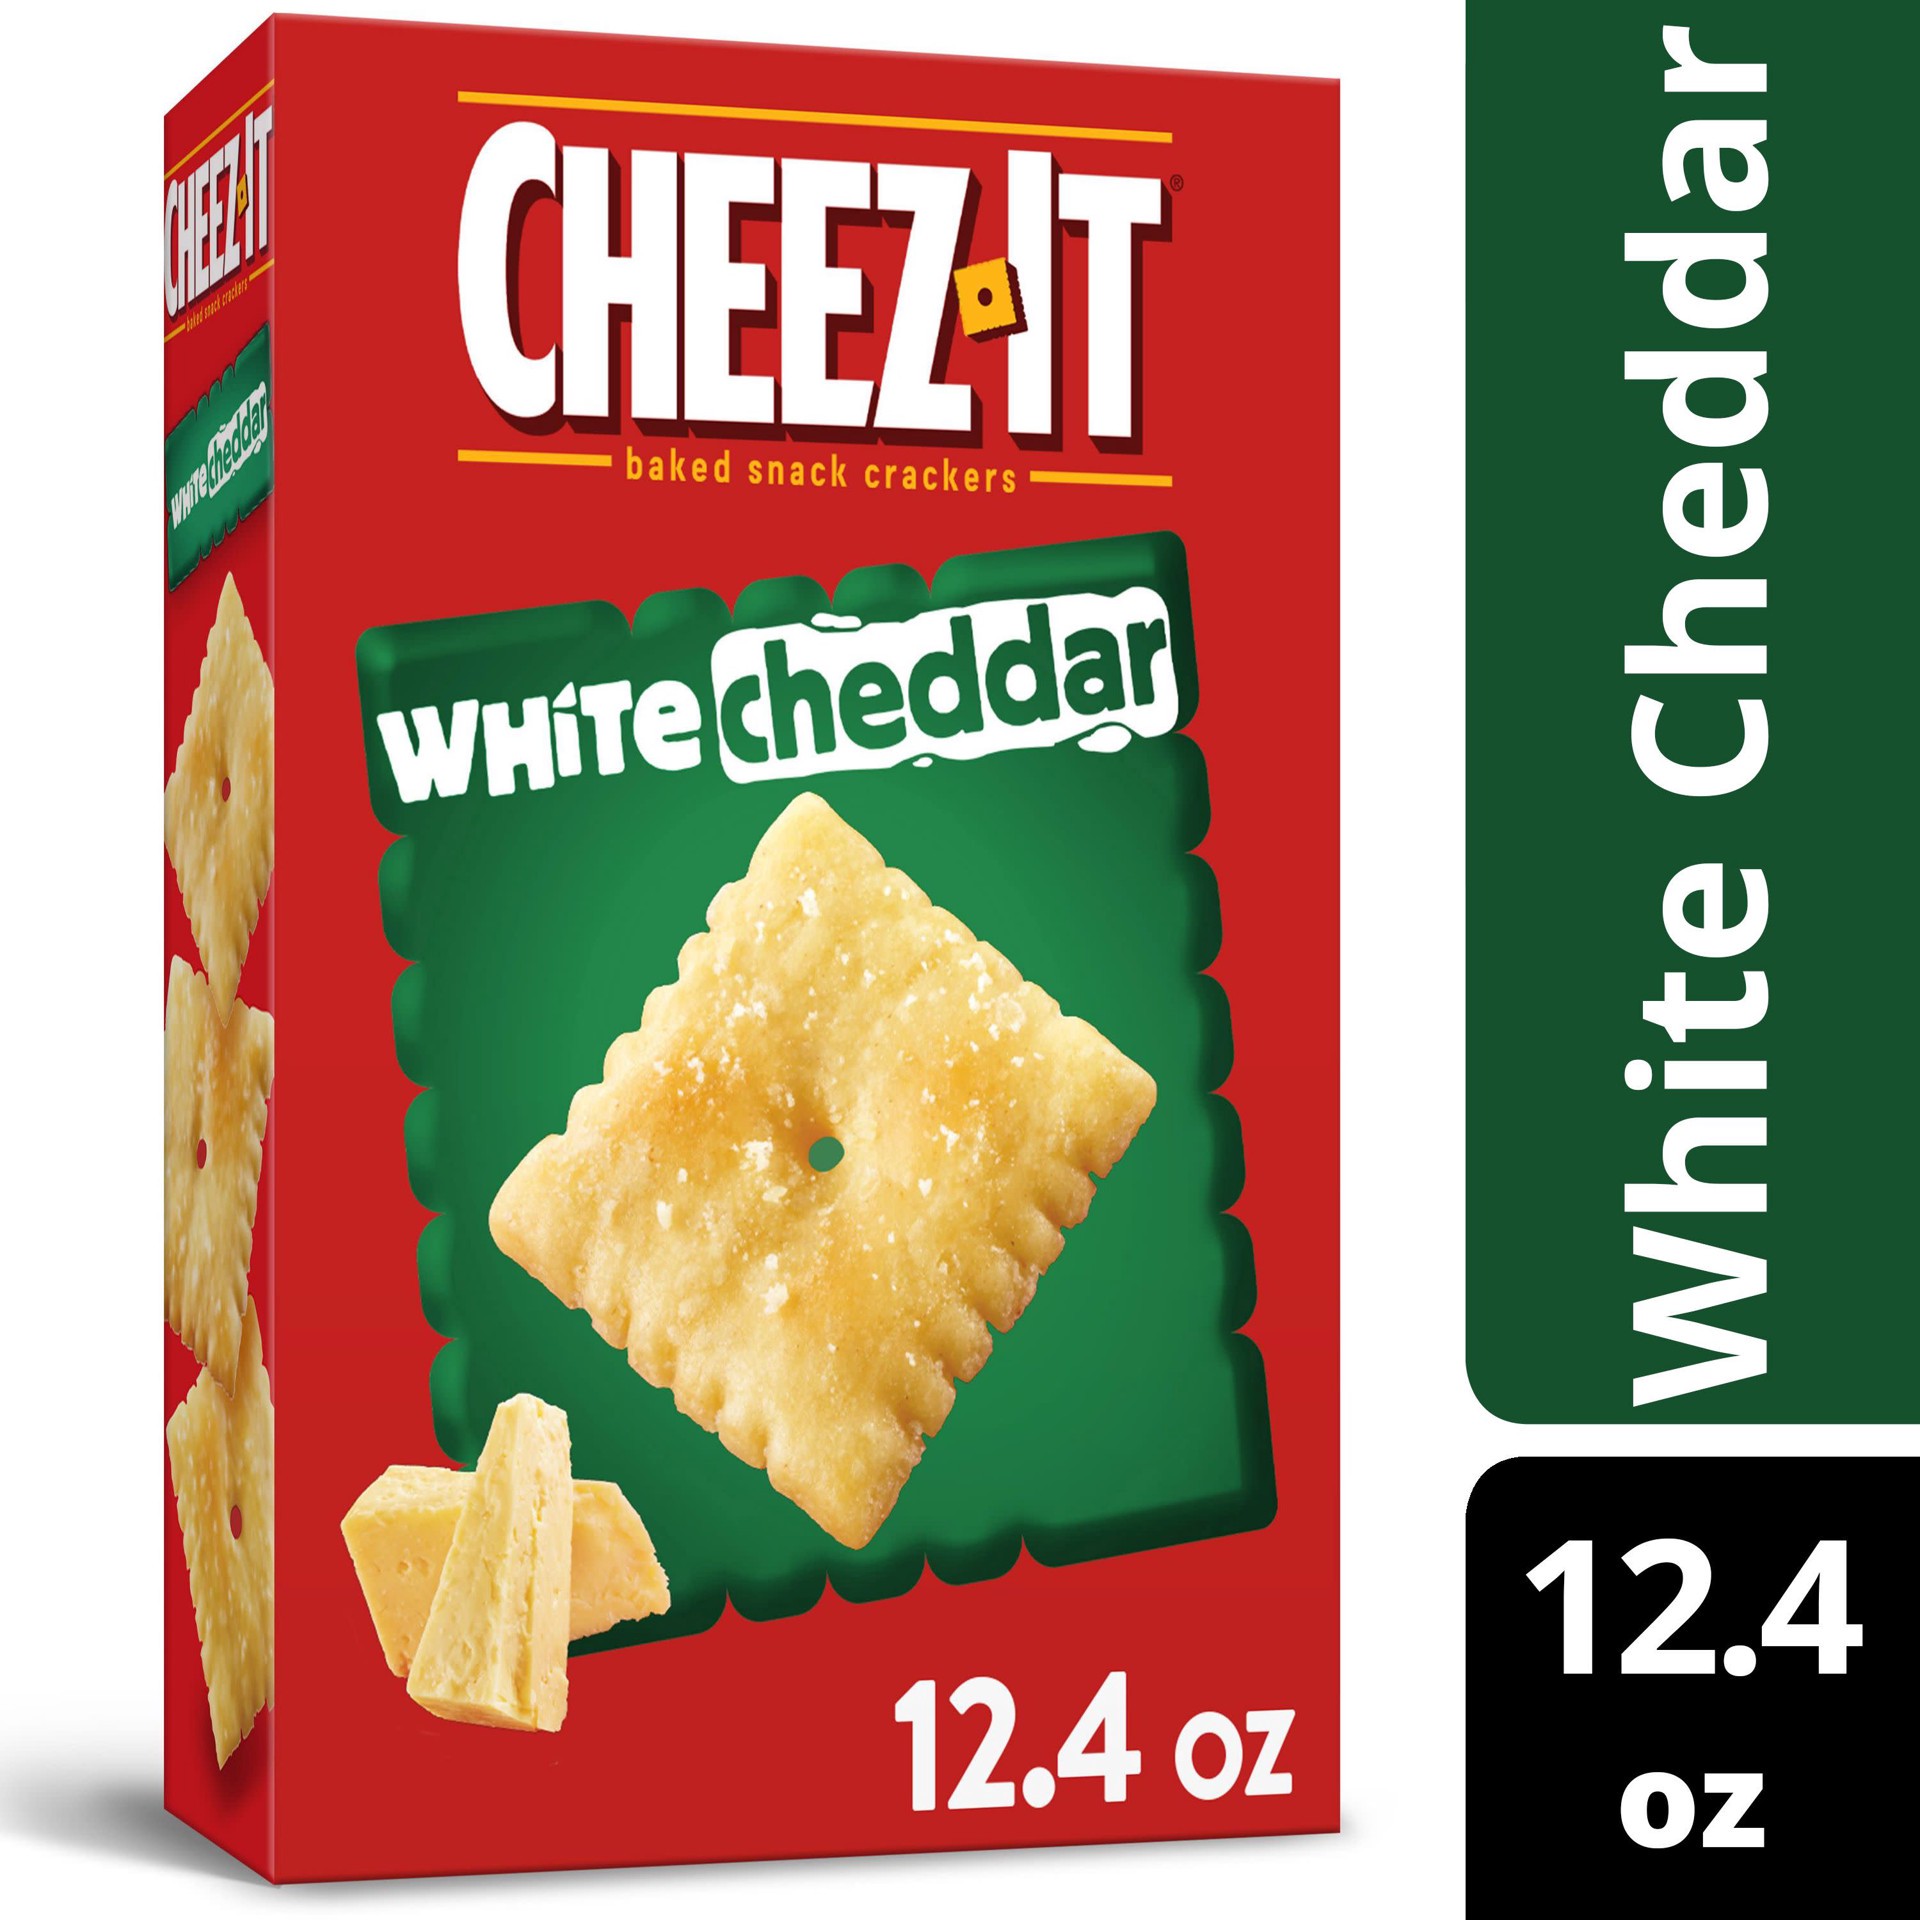 slide 1 of 5, Cheez-It White Cheddar Baked Snack Crackers - 12.4oz, 12.4 oz